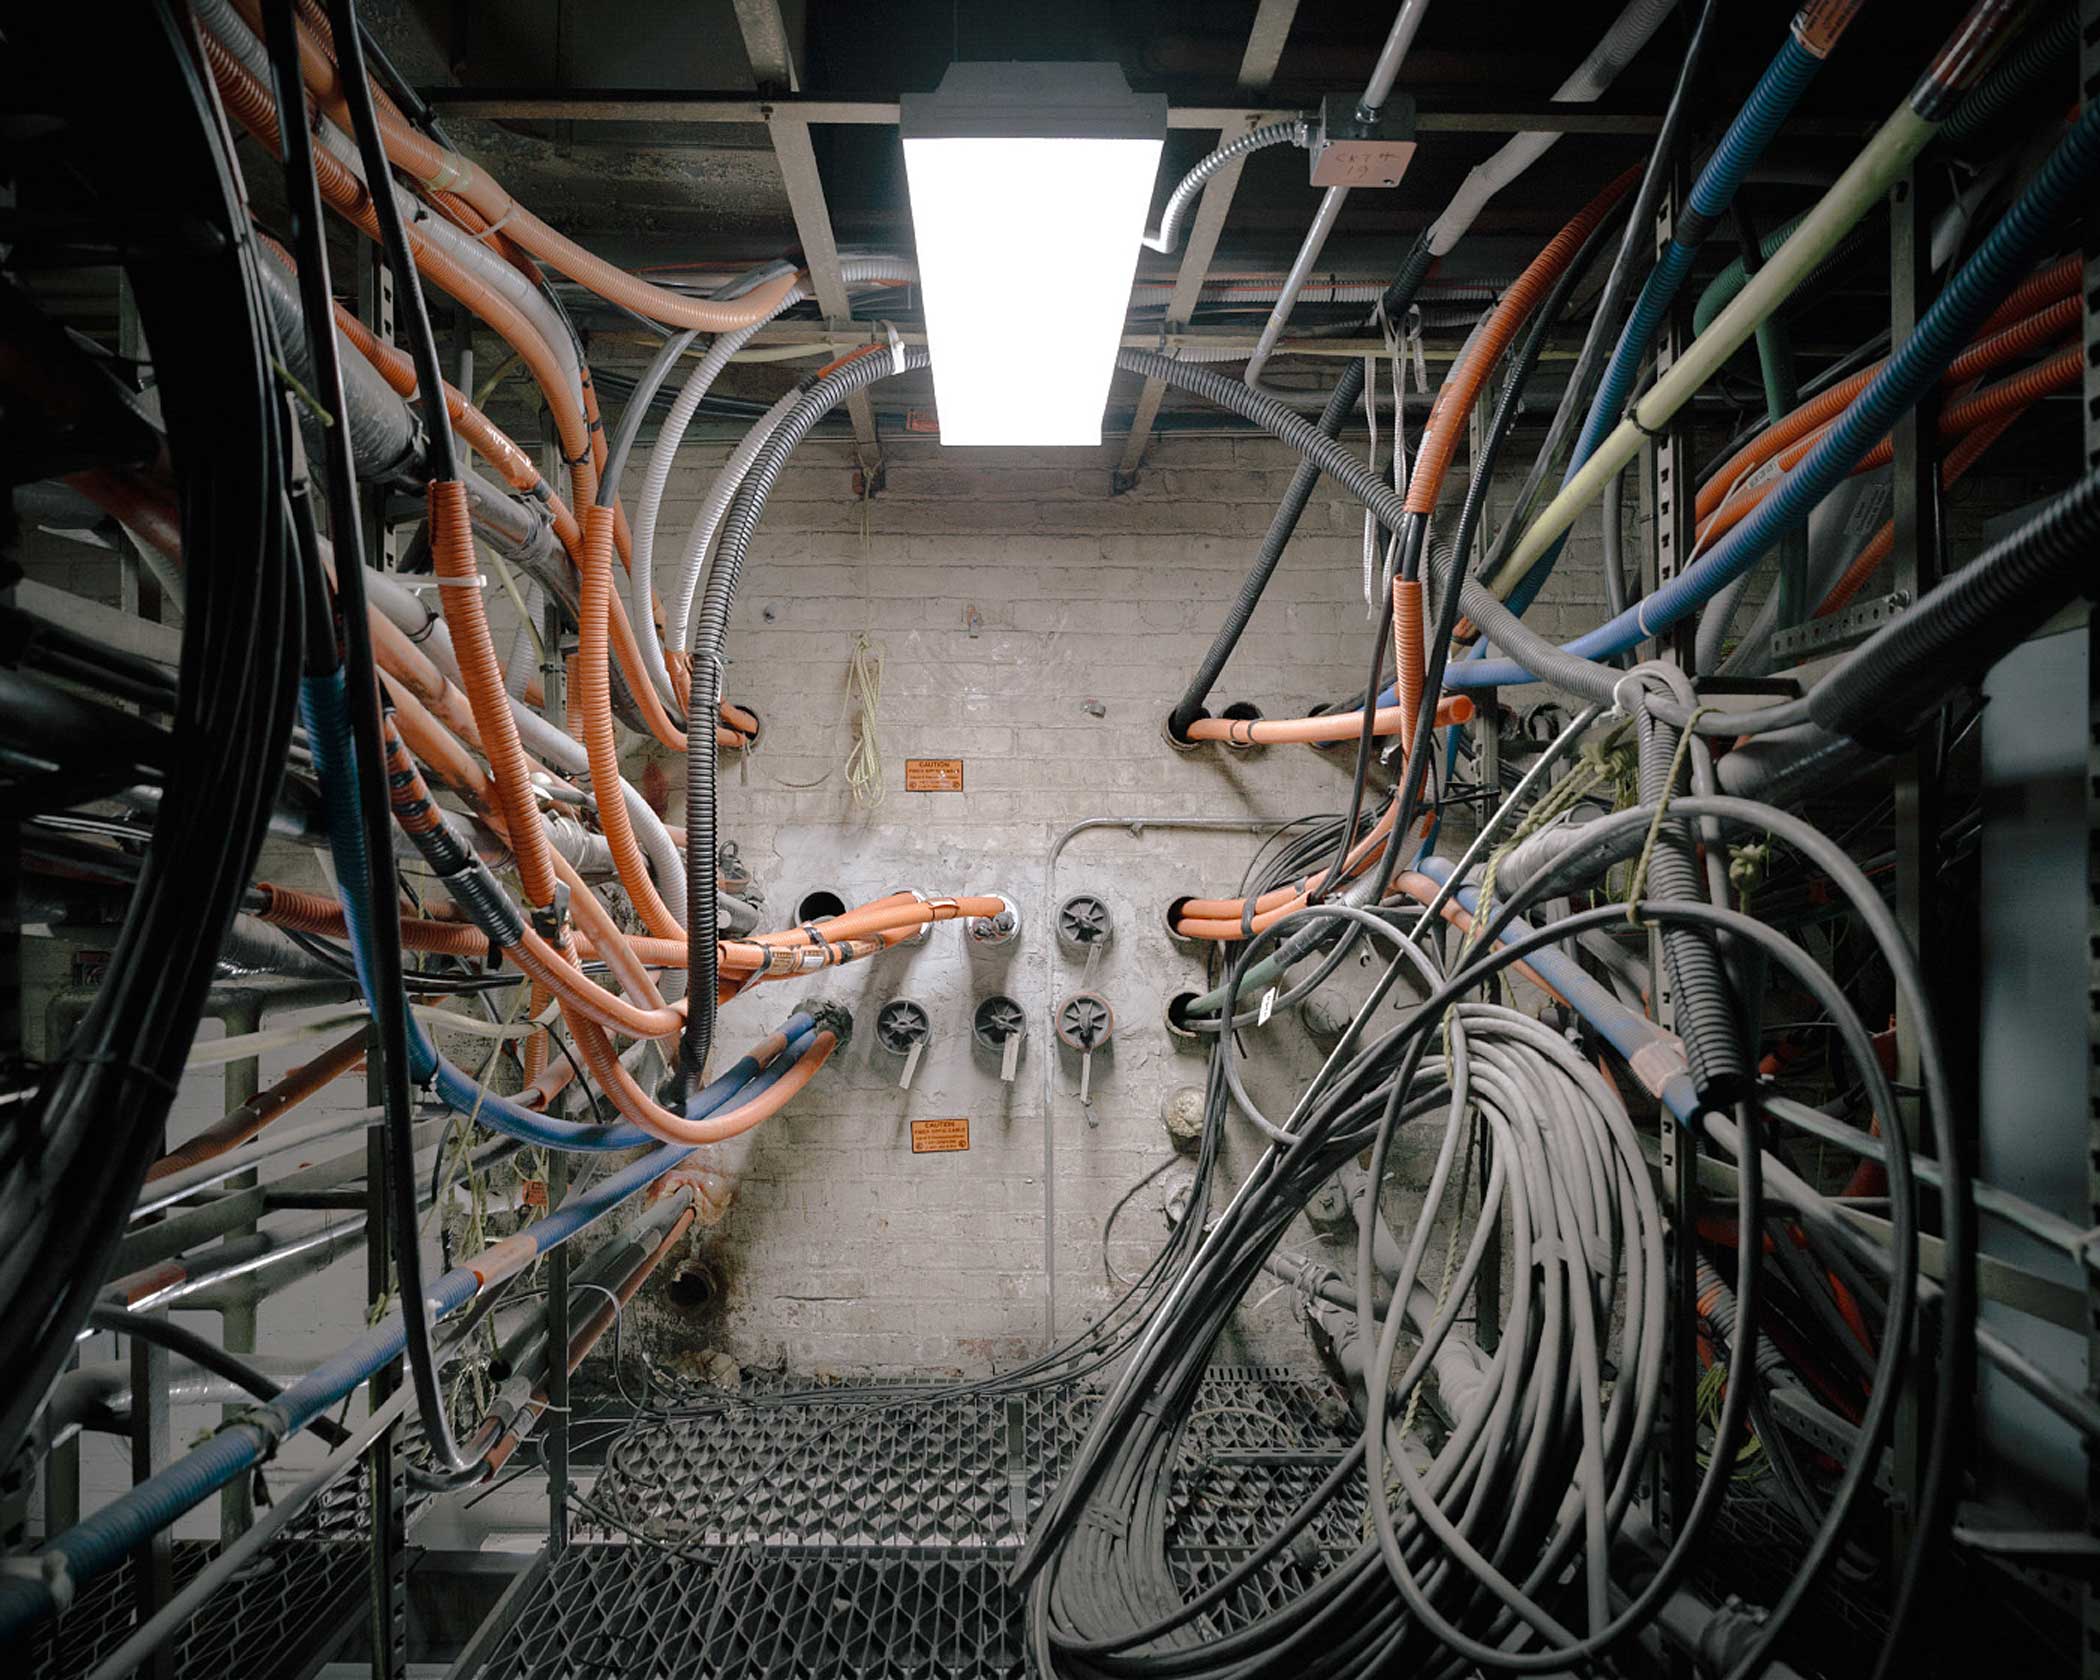 Fiber optic cables enter and exit carrier hotels through underground vaults. Some of these cables run local connections, while others are on their way to eventually cross the Atlantic via landing stations in New York and New Jersey. Various networks and service providers pay for access to carrier hotels through the the conduit in these fiber vaults.